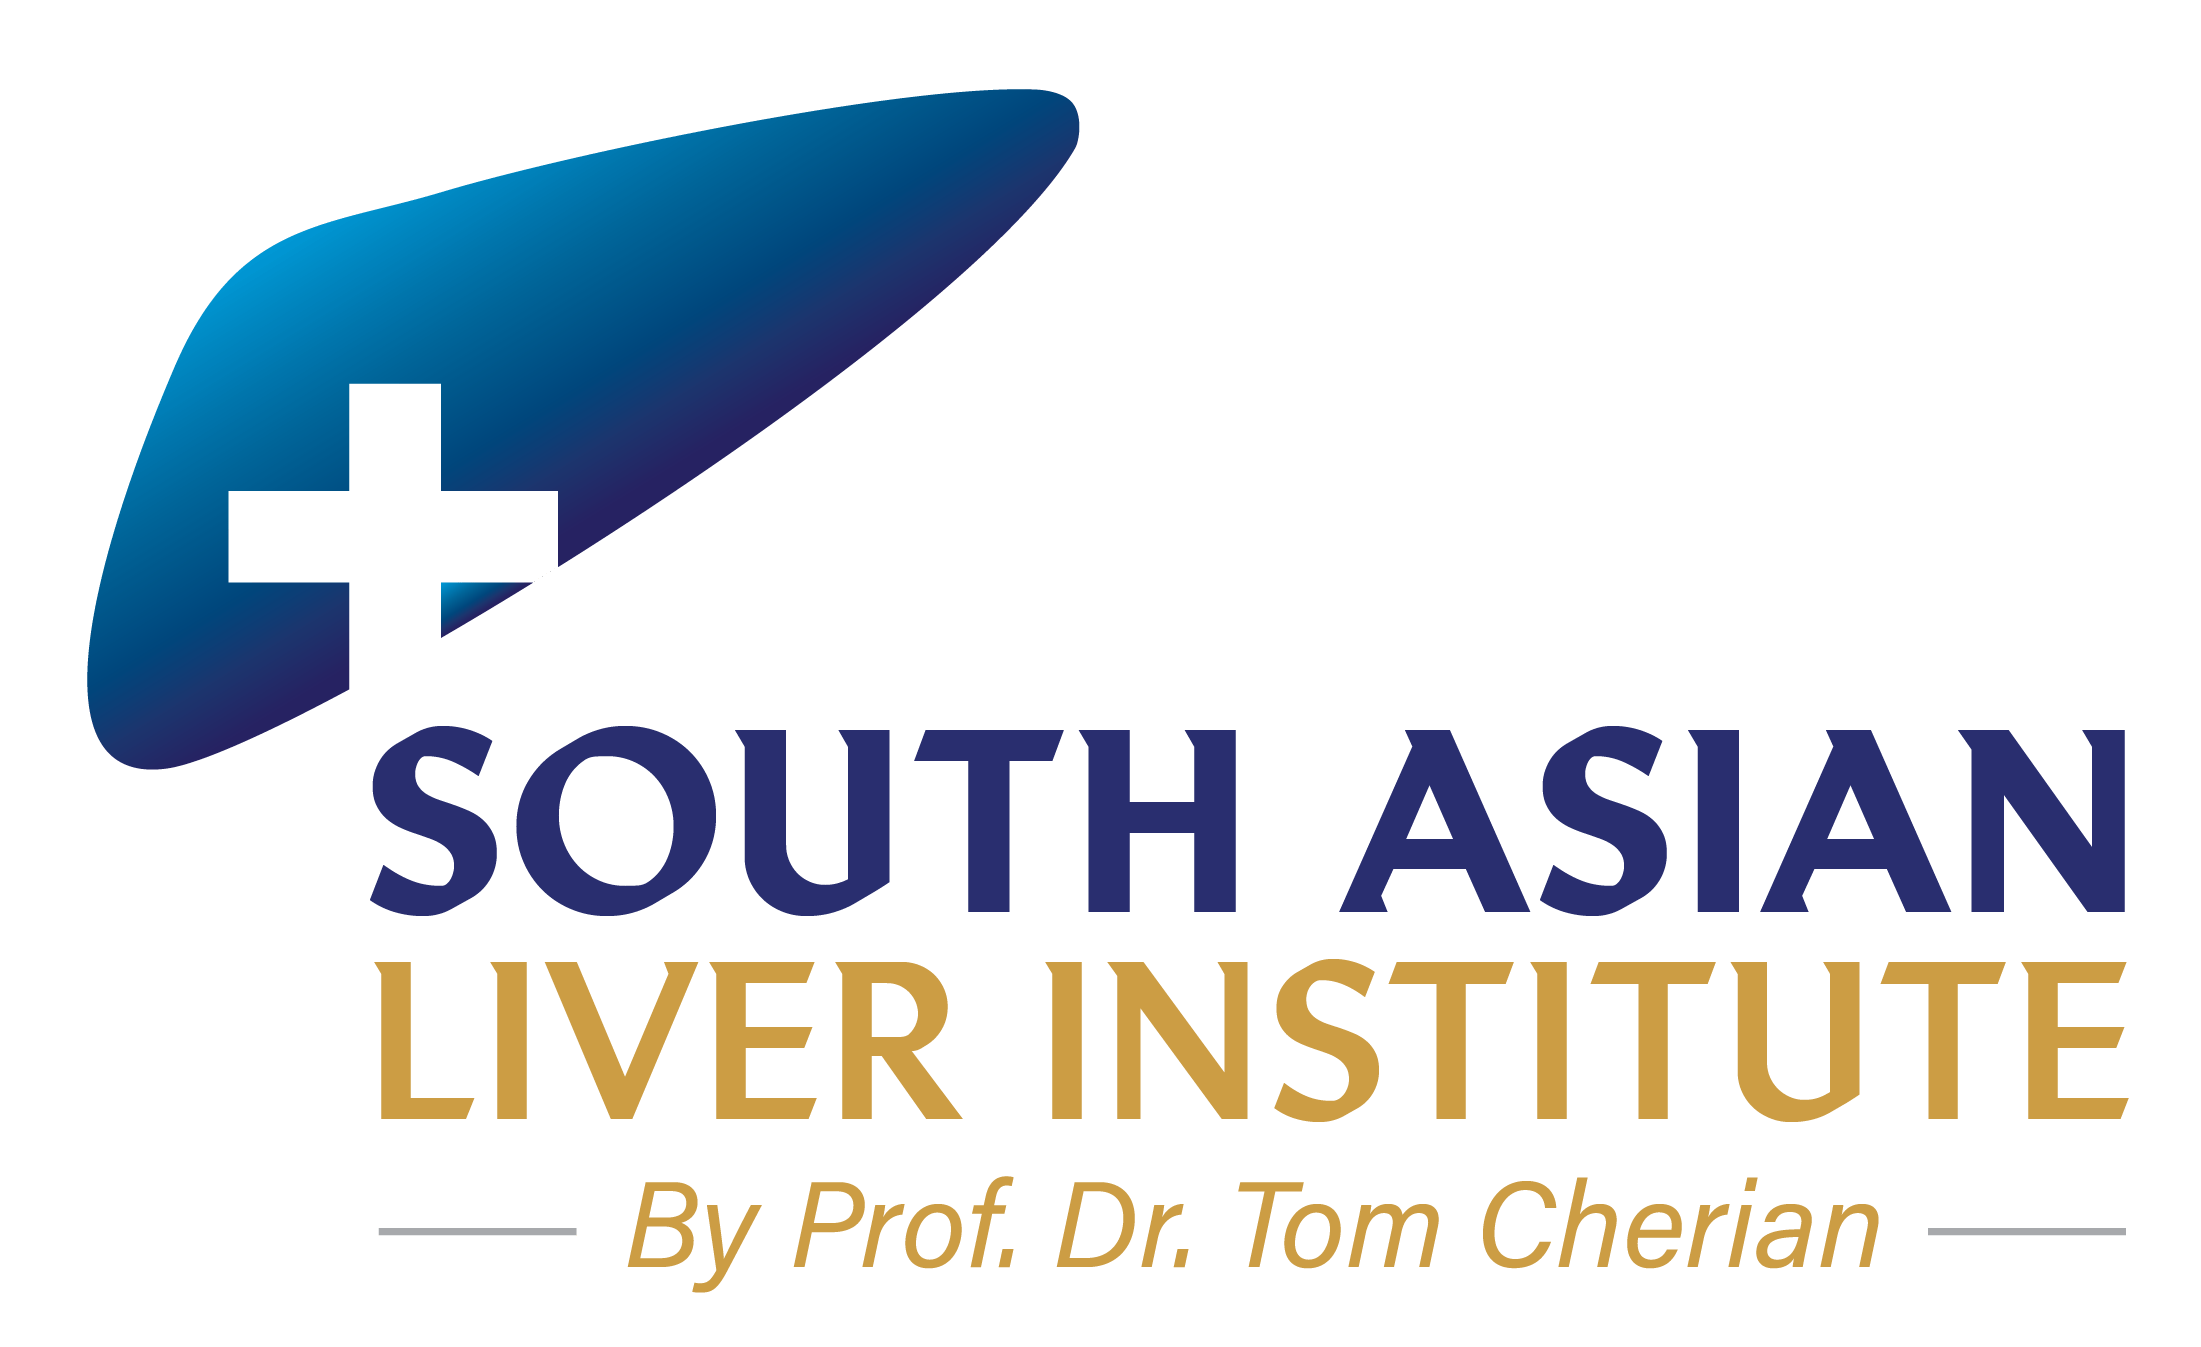 South Asian Liver Institute